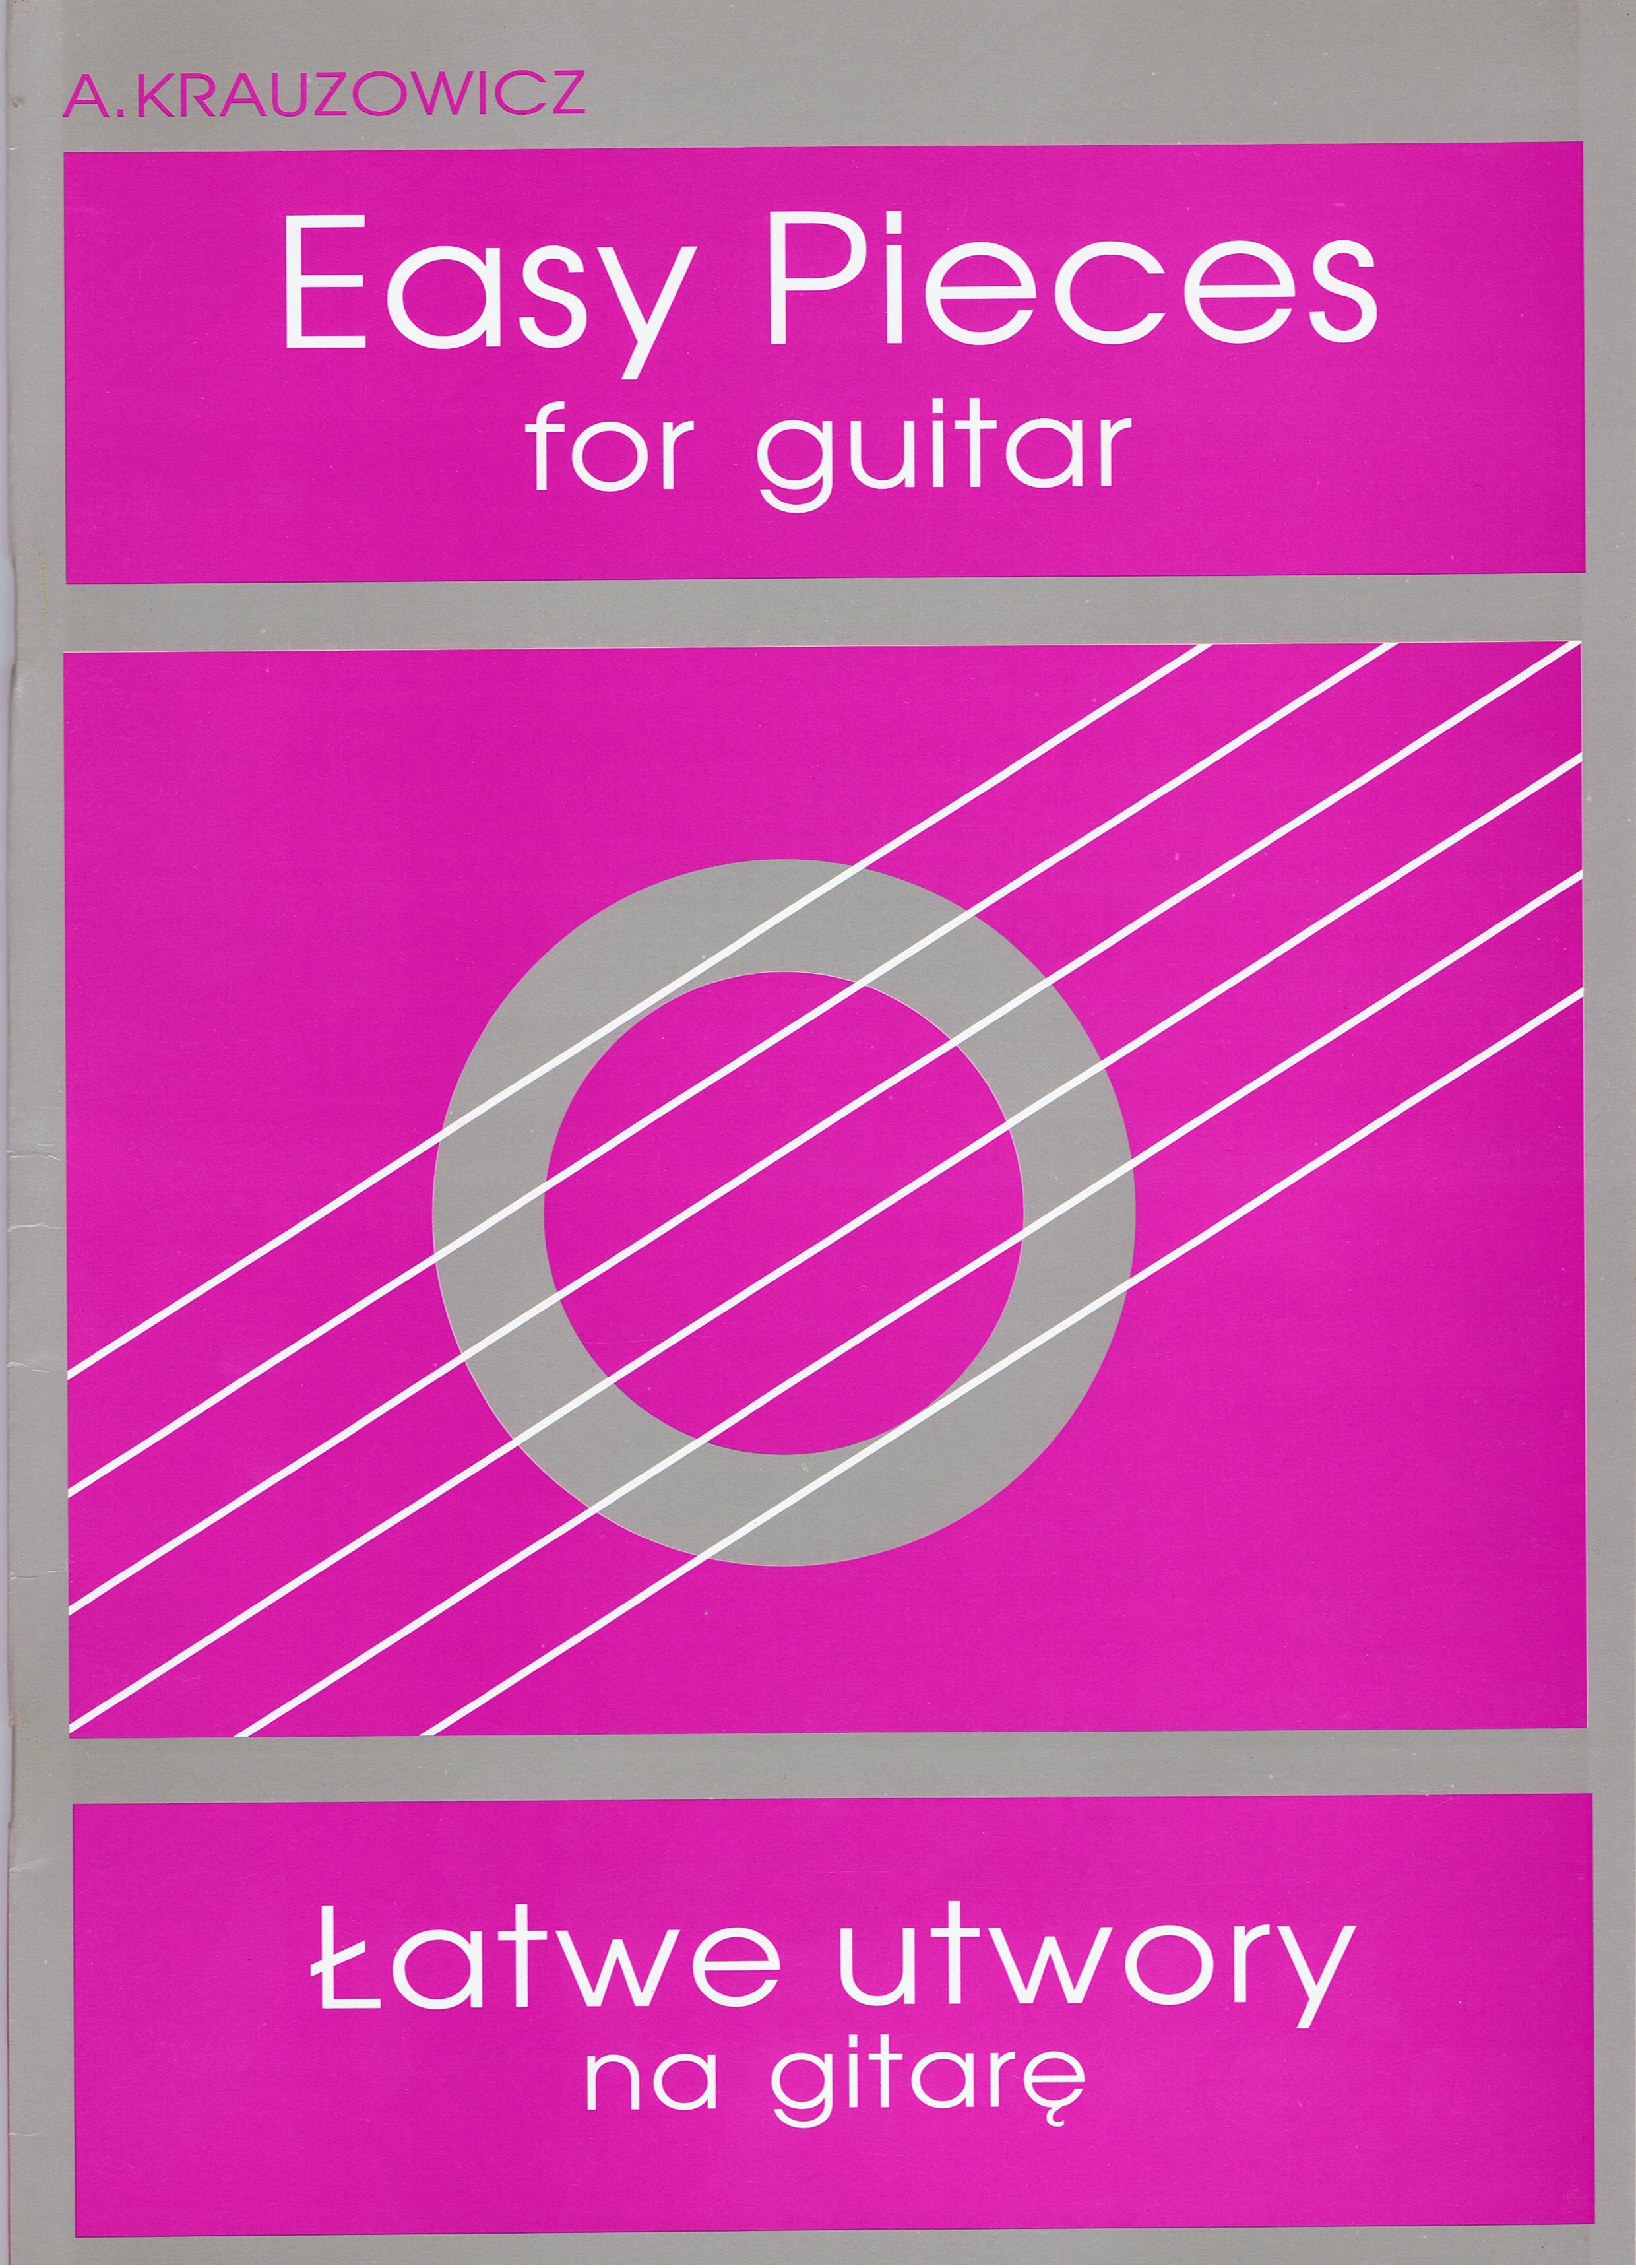 EASY PIECES FOR GUITAR